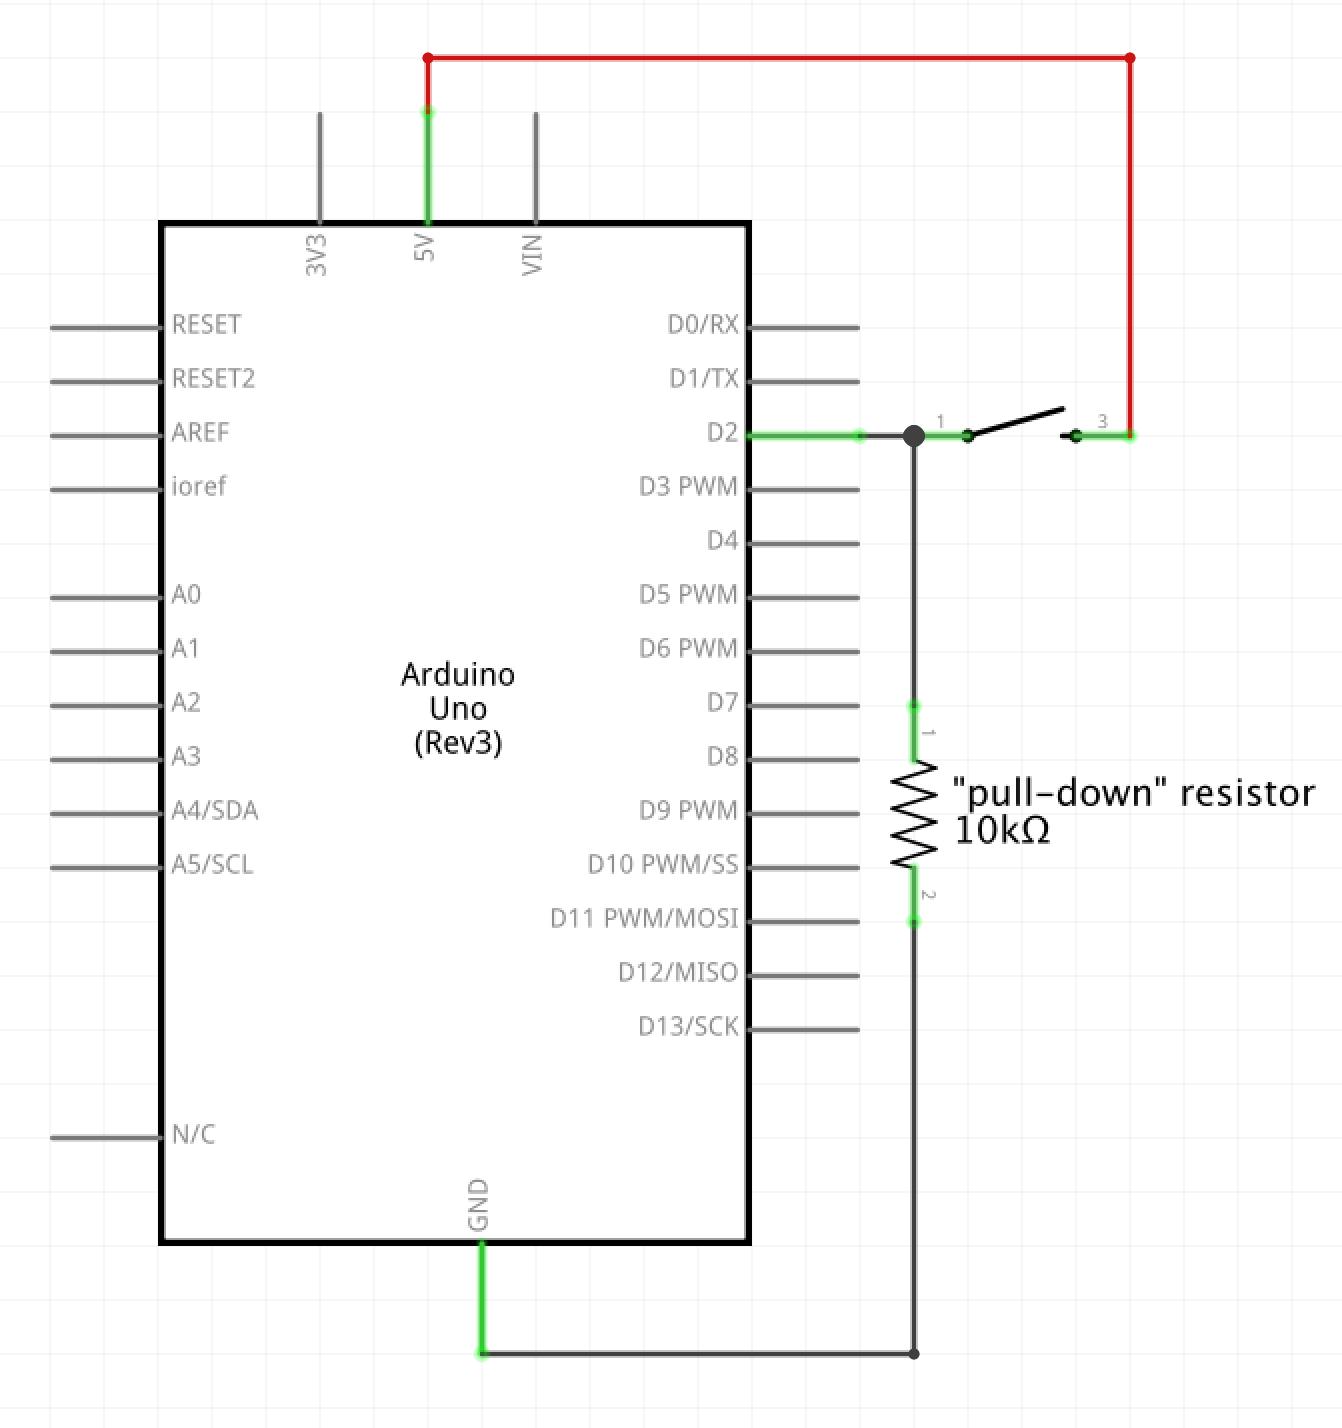 Schematic drawing: a simple switch (single pole single throw) is wired from 5V to one side to digital input pin 2 on an Arduino on its other side. Additionally, a 10kΩ resistor is wired from pin 2 on the Arduino to ground.